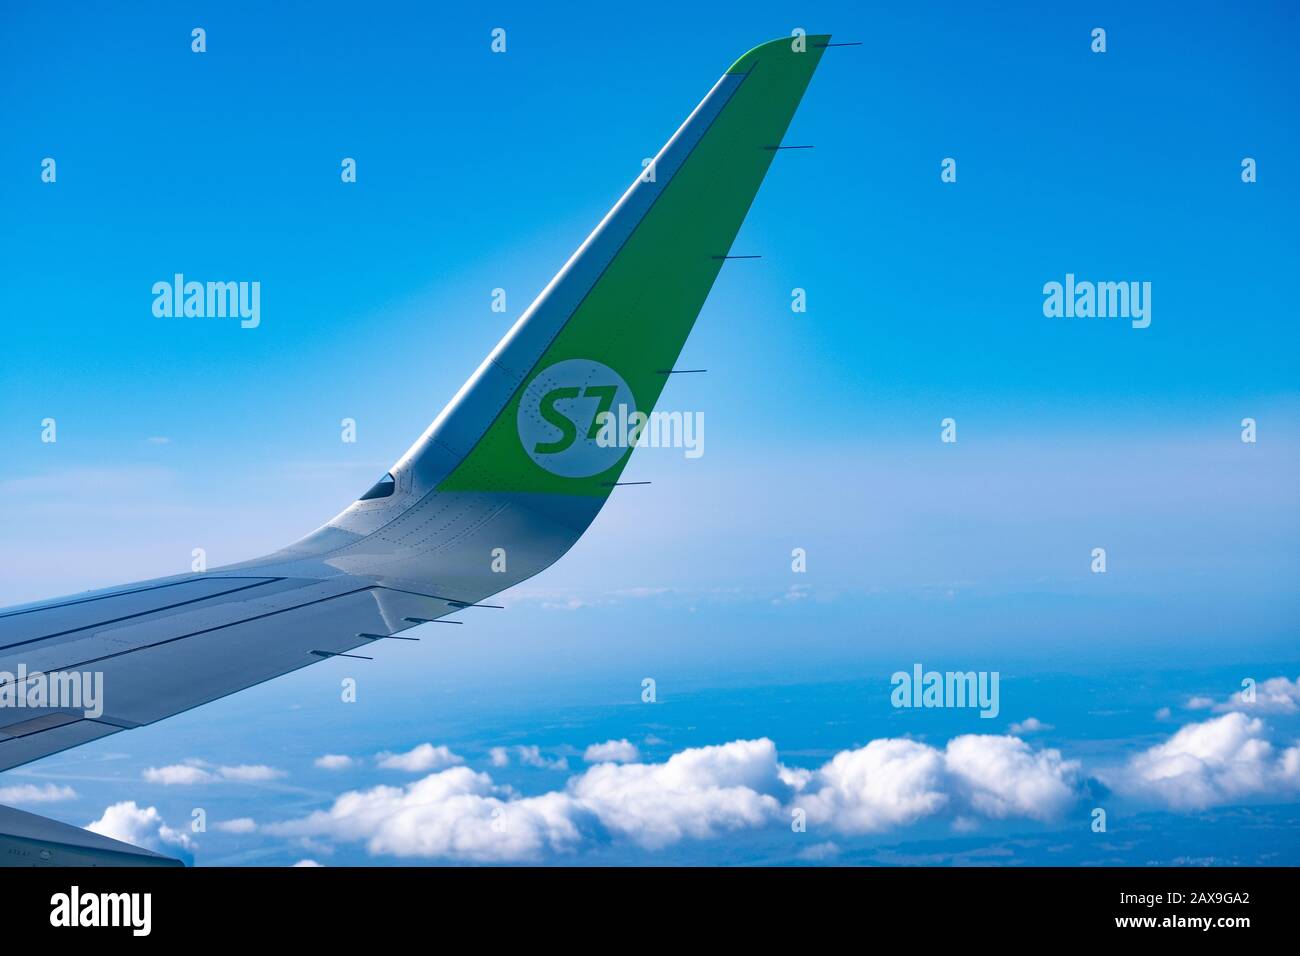 The wing of the S7 airline plane from the window over Tokyo. View of the clouds in the daytime. Stock Photo